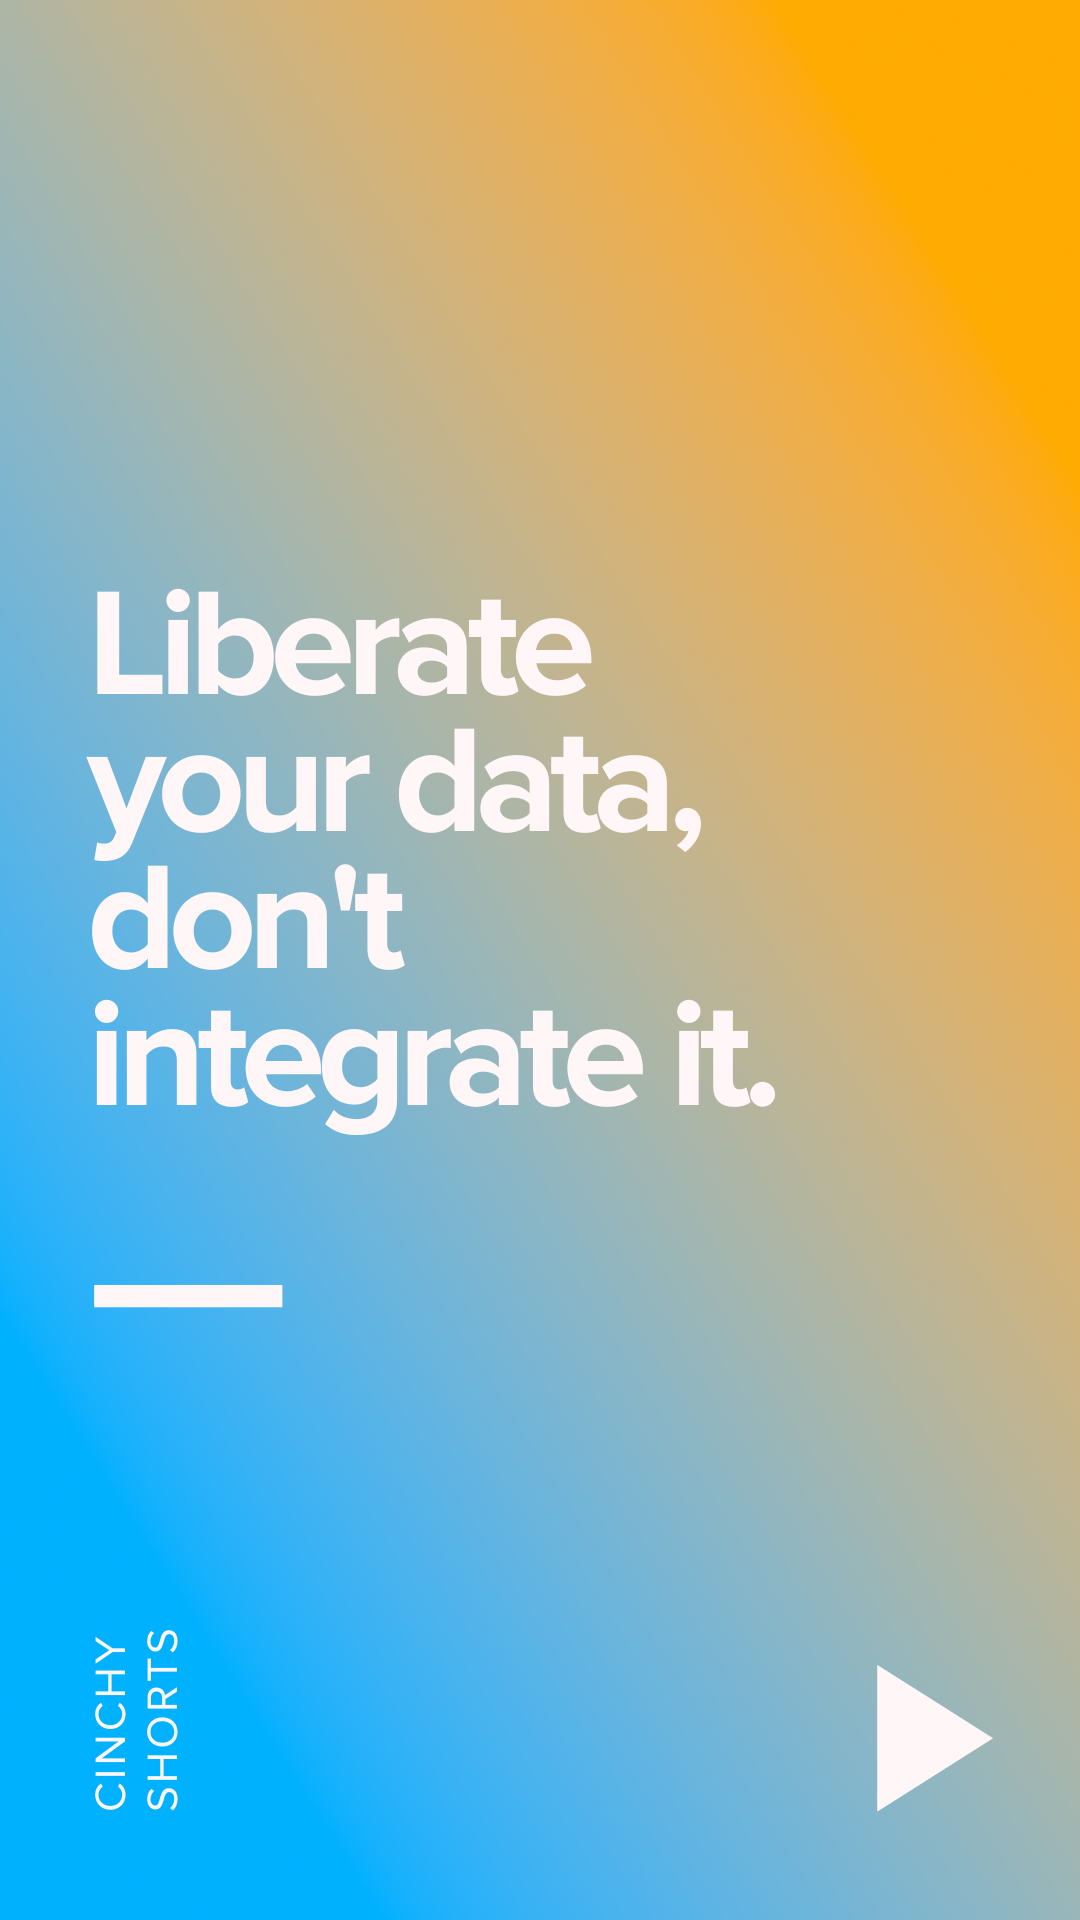 Liberate your data, don't integrate it.